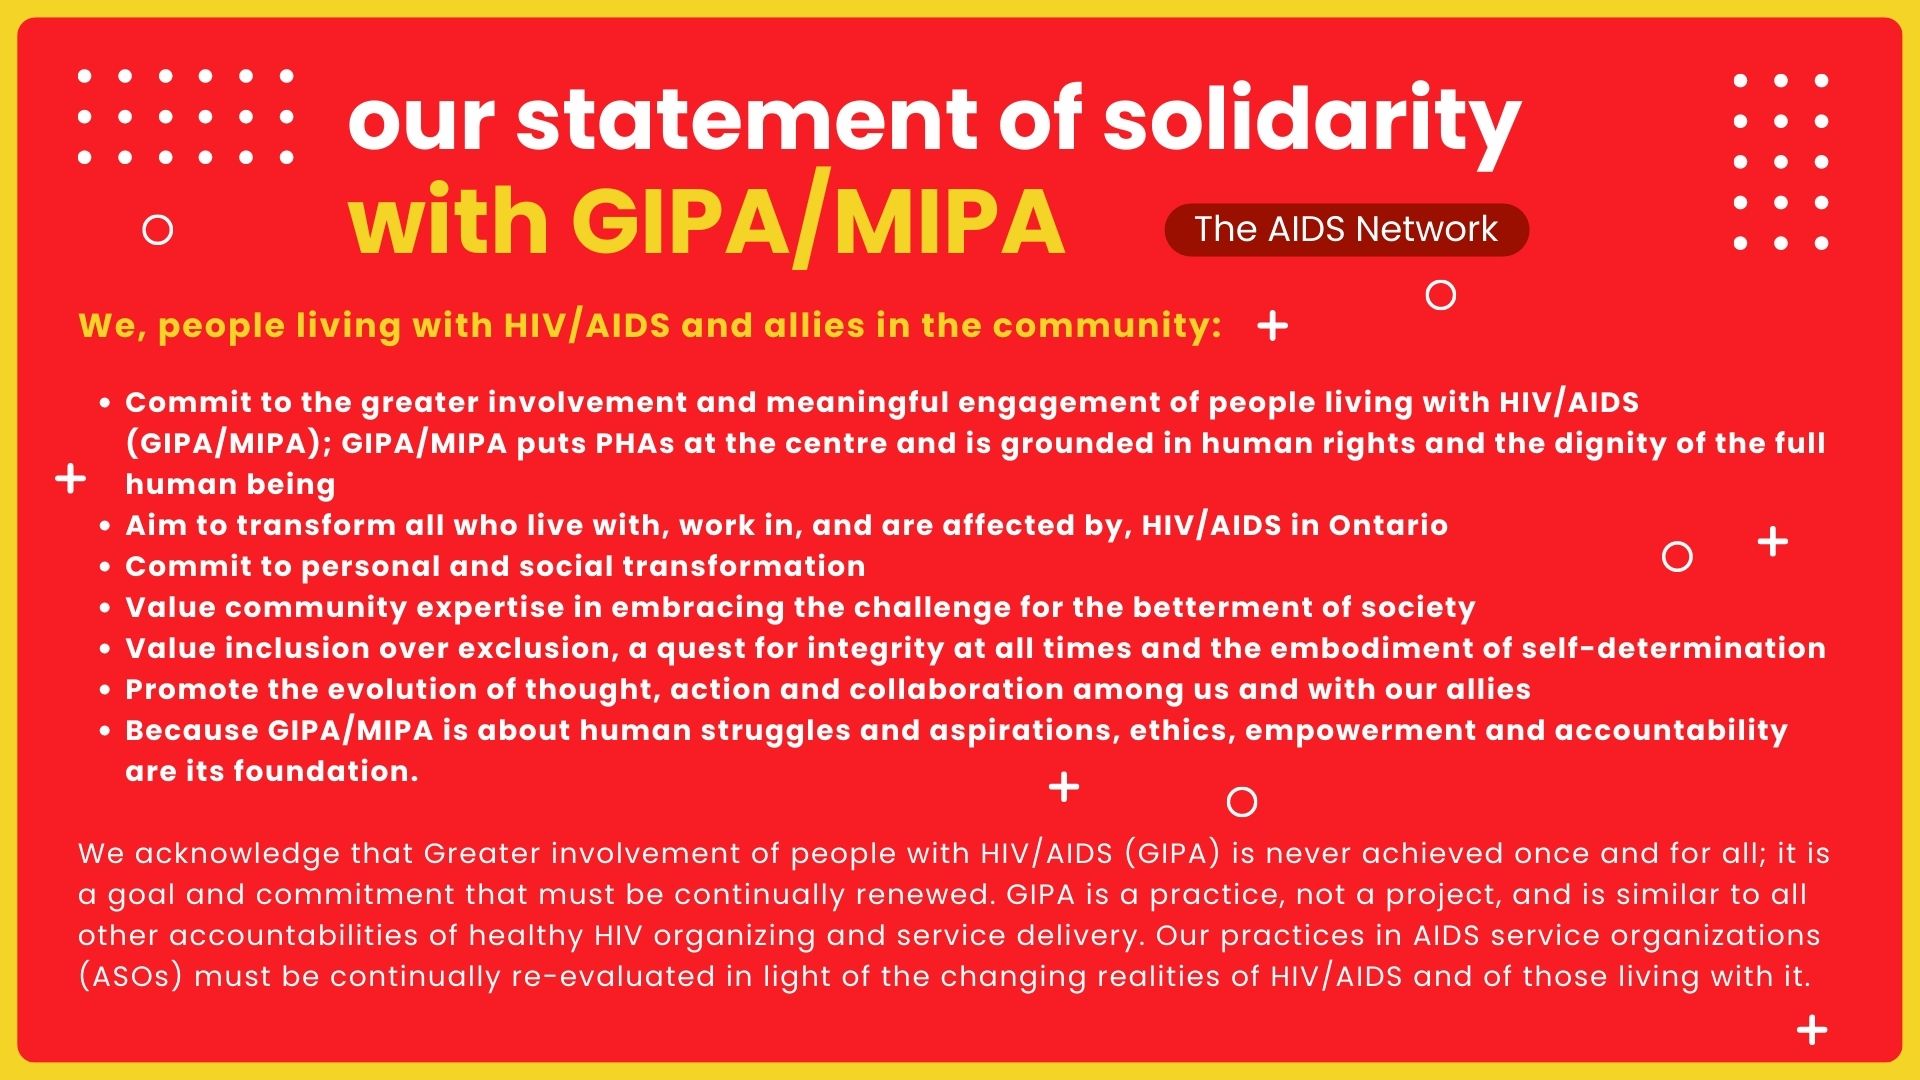 our statement of solidarity with GIPA/MIPA